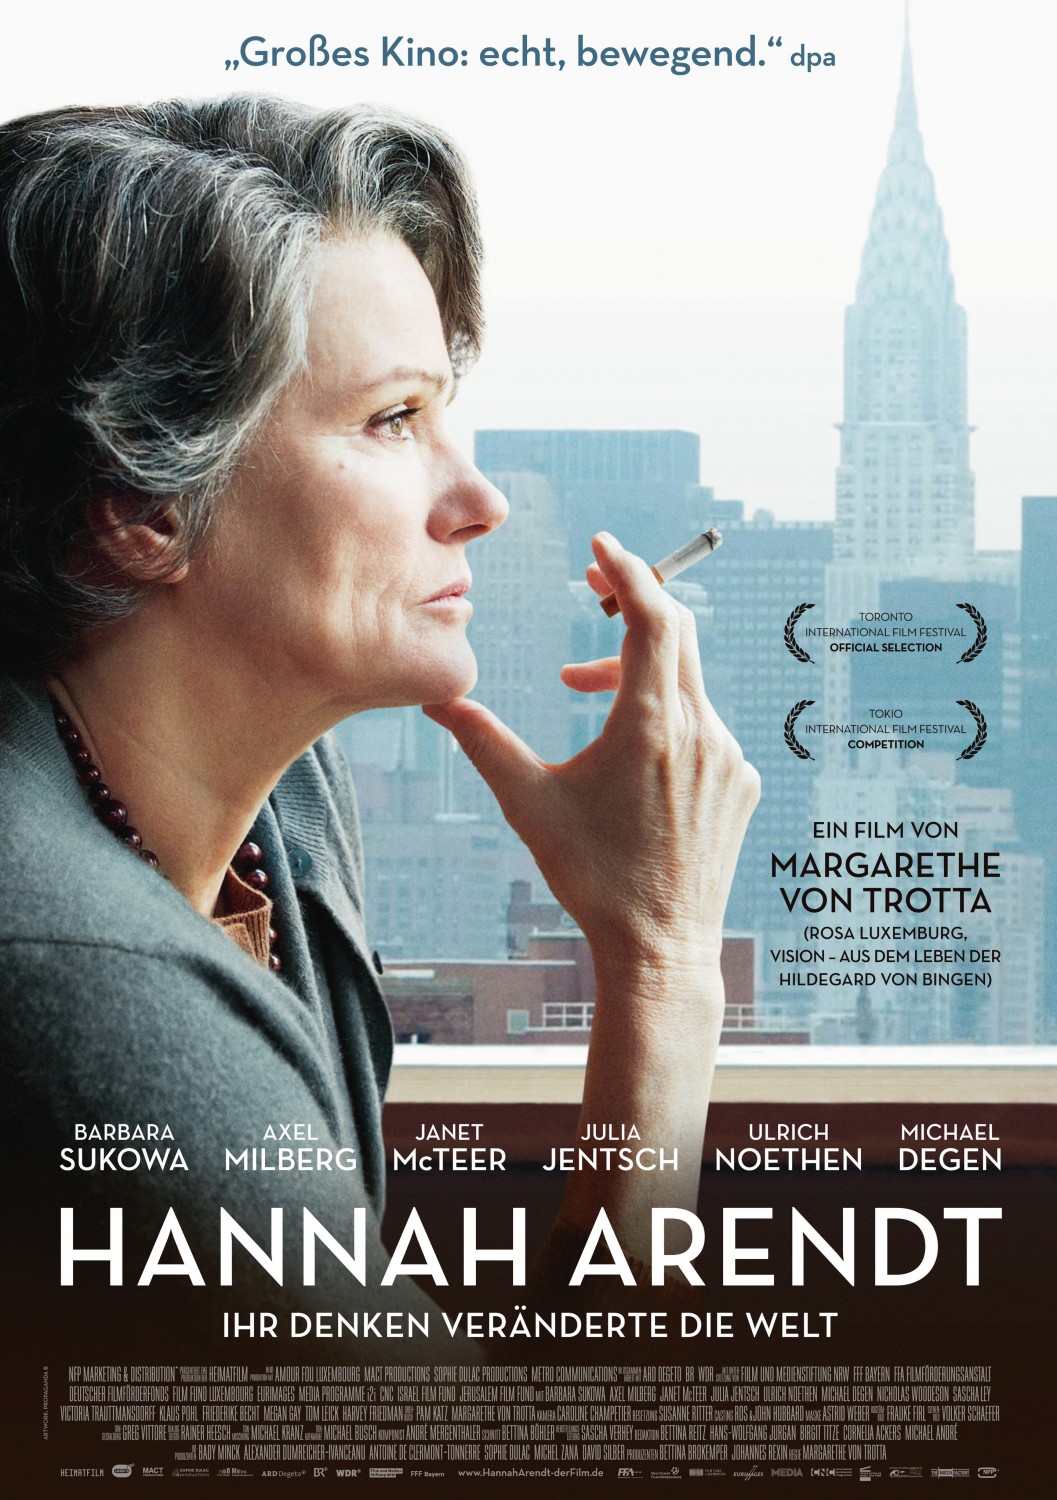 http://www.impawards.com/intl/germany/2013/posters/hannah_arendt_xlg.jpg